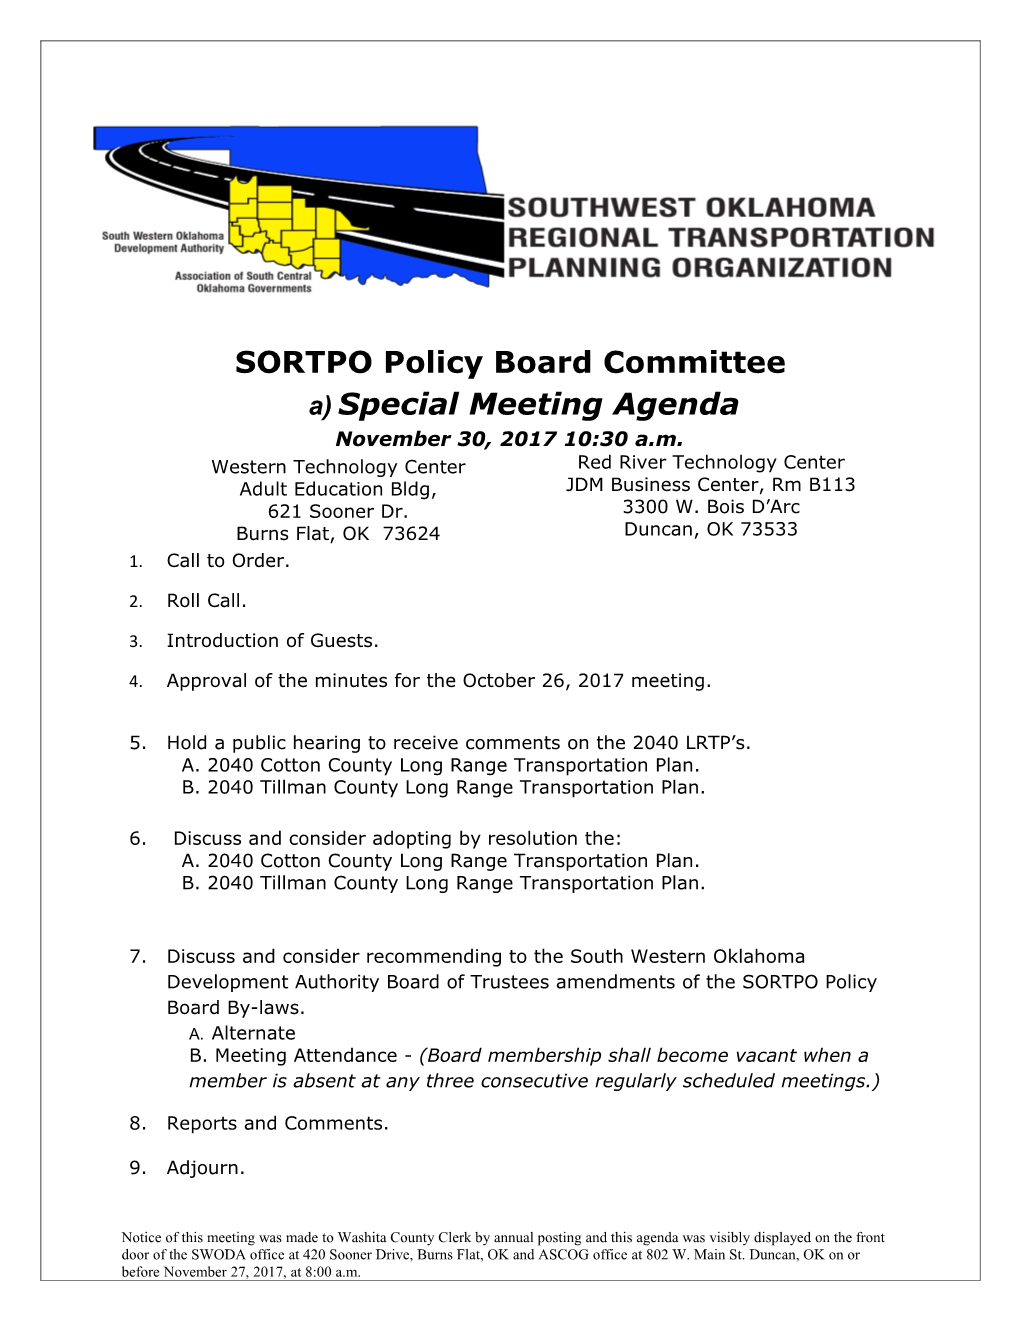 SORTPO Policy Board Committee